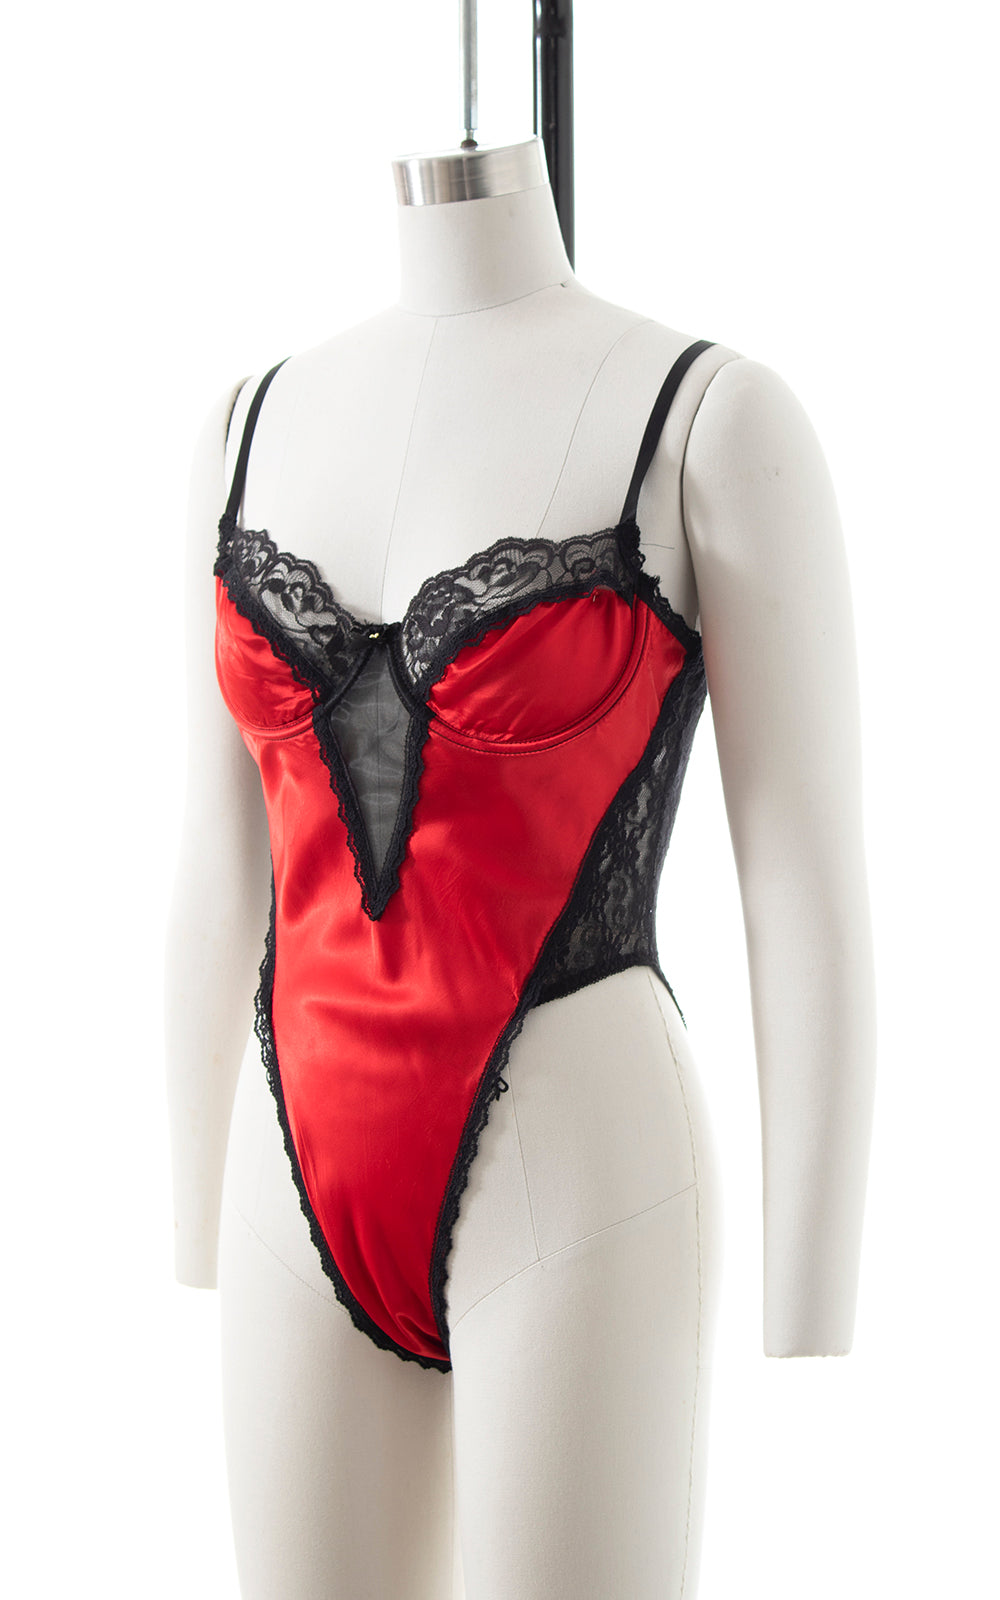 1980s Red Satin & Black Lace High Cut Bodysuit | x-small/small